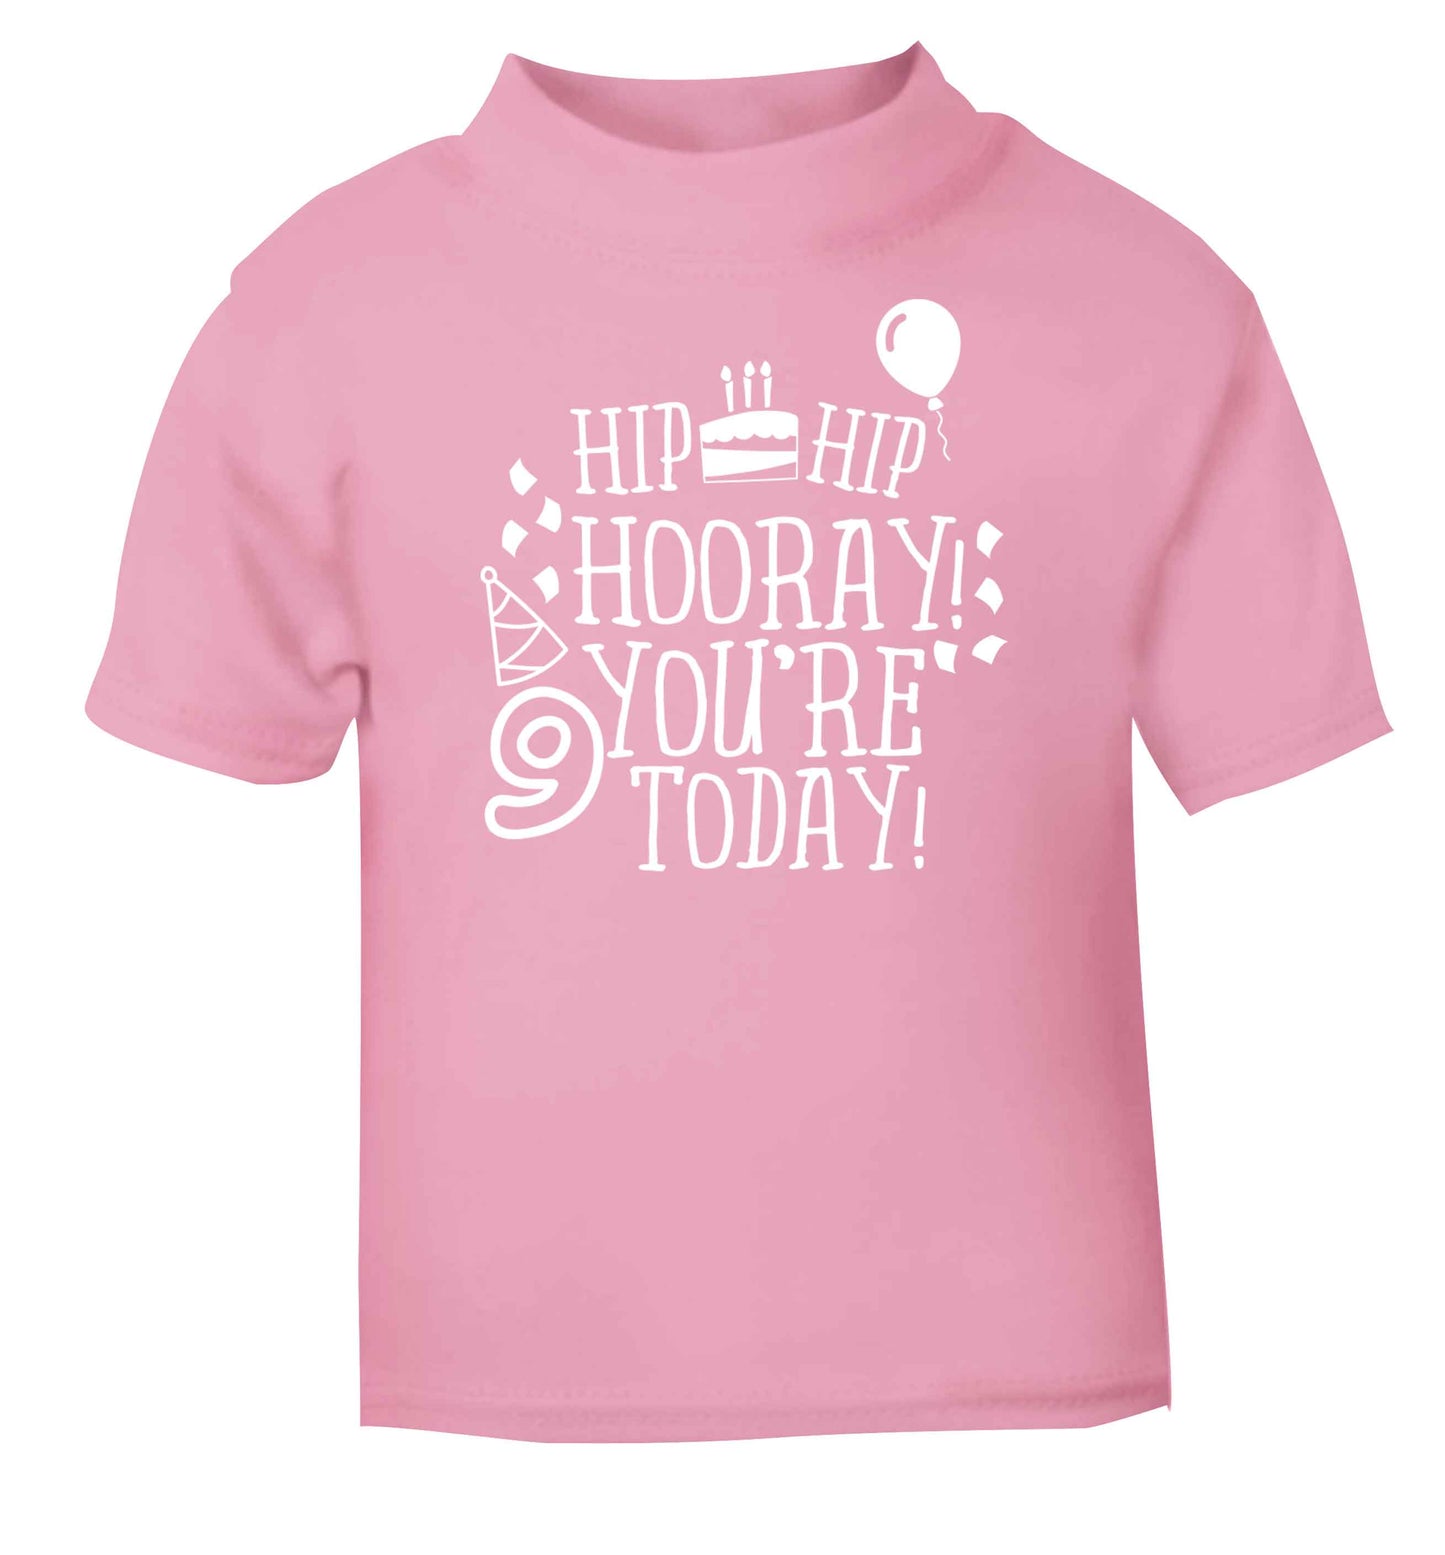 Hip hip hooray you're 9 today! light pink baby toddler Tshirt 2 Years